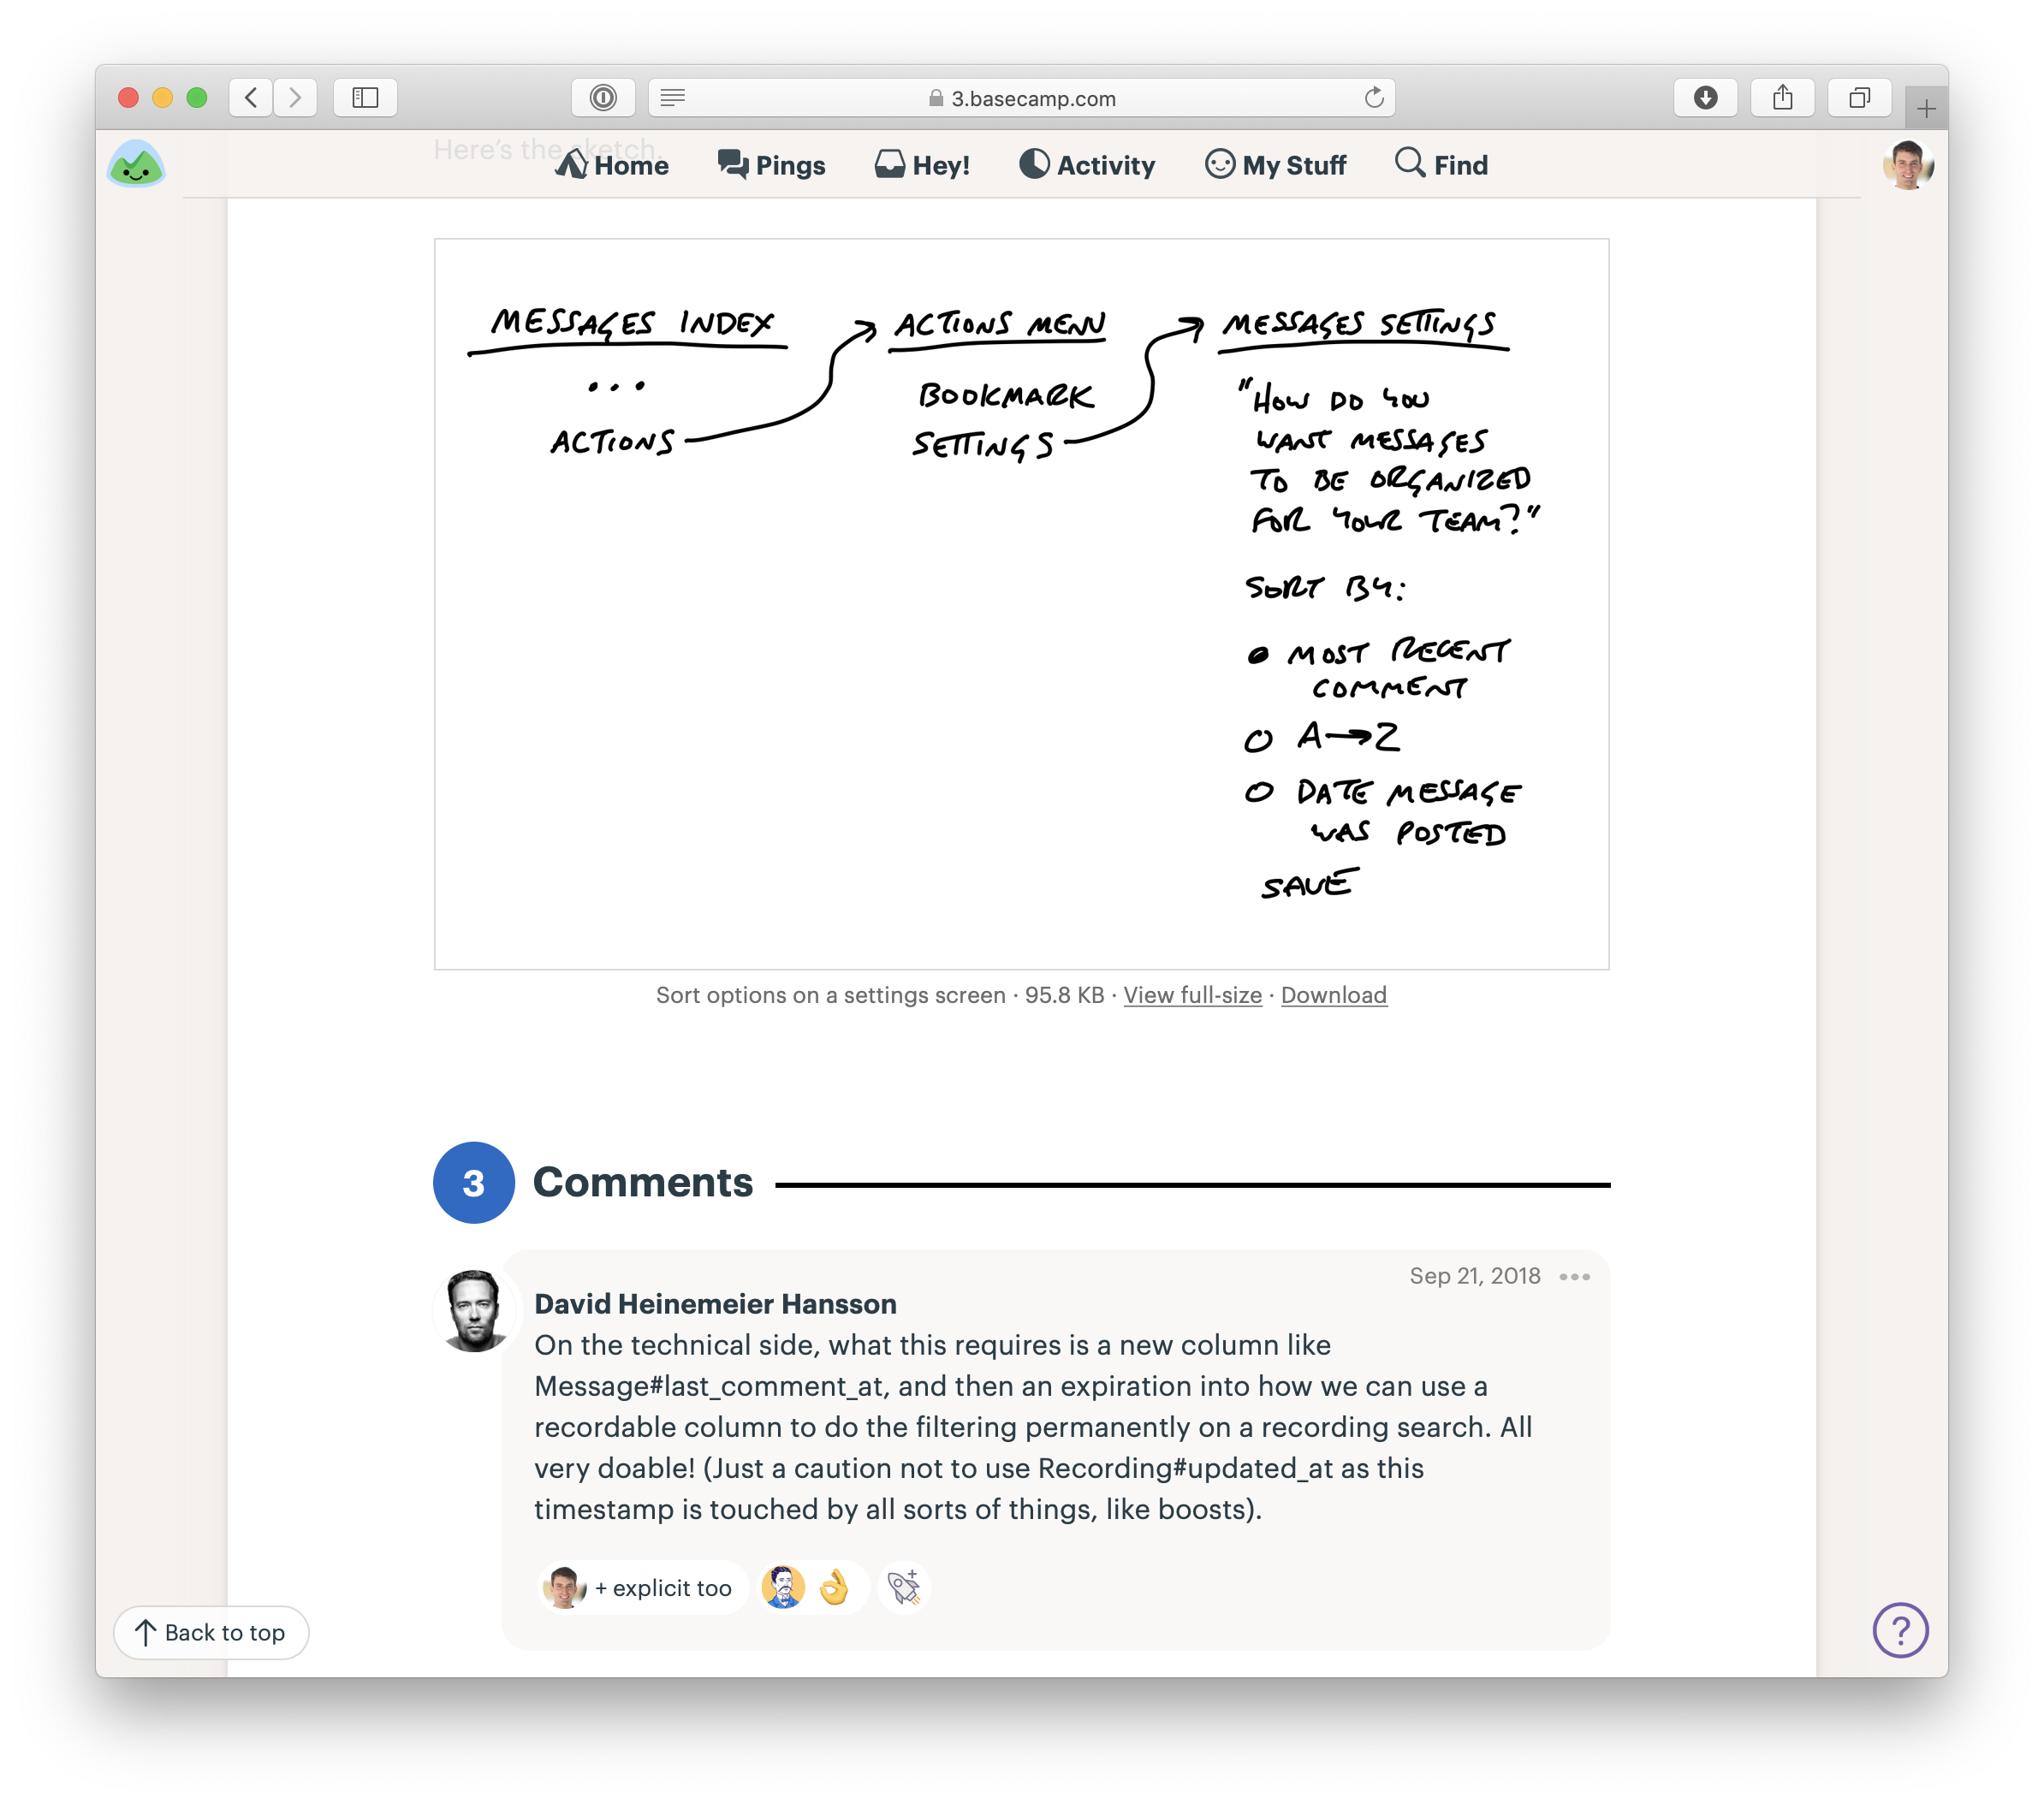 A screenshot of a pitch that is scrolled down to the bottom. A breadboard appears at the end of the document. Below that, a comment thread begins. The first comment is by David, the CTO, providing information about what the pitch requires from a technical standpoint.